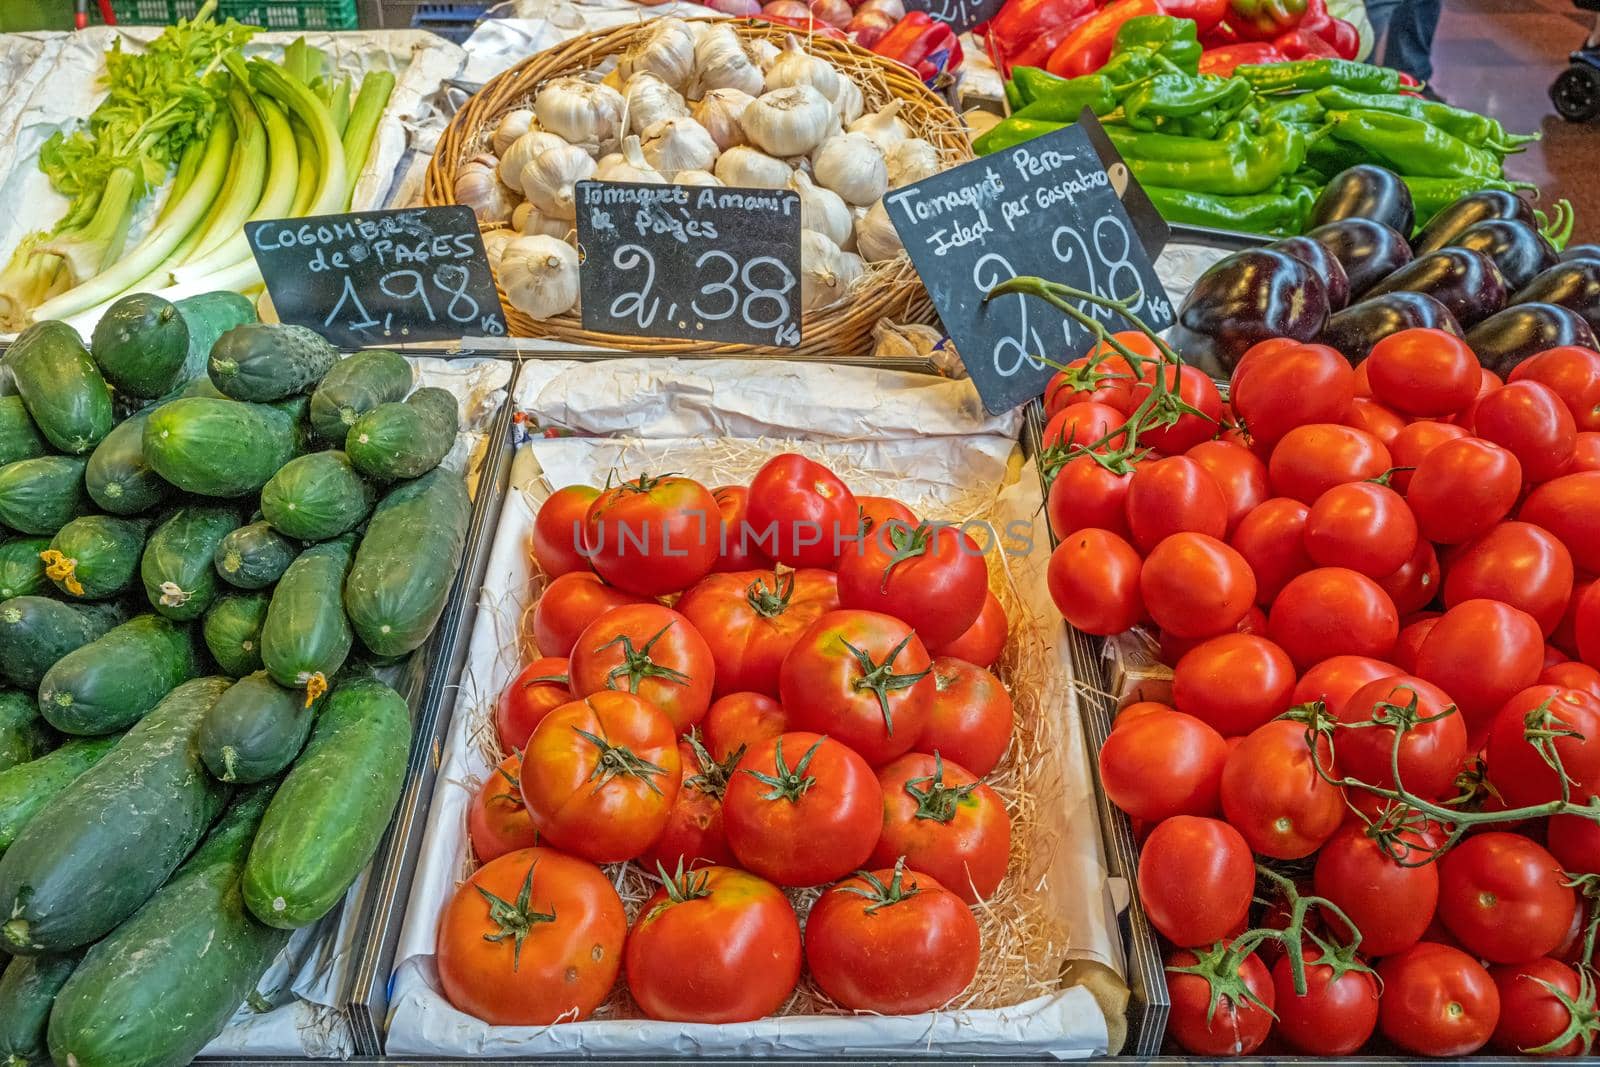 Tomatoes, pickles and garlic for sale at a market